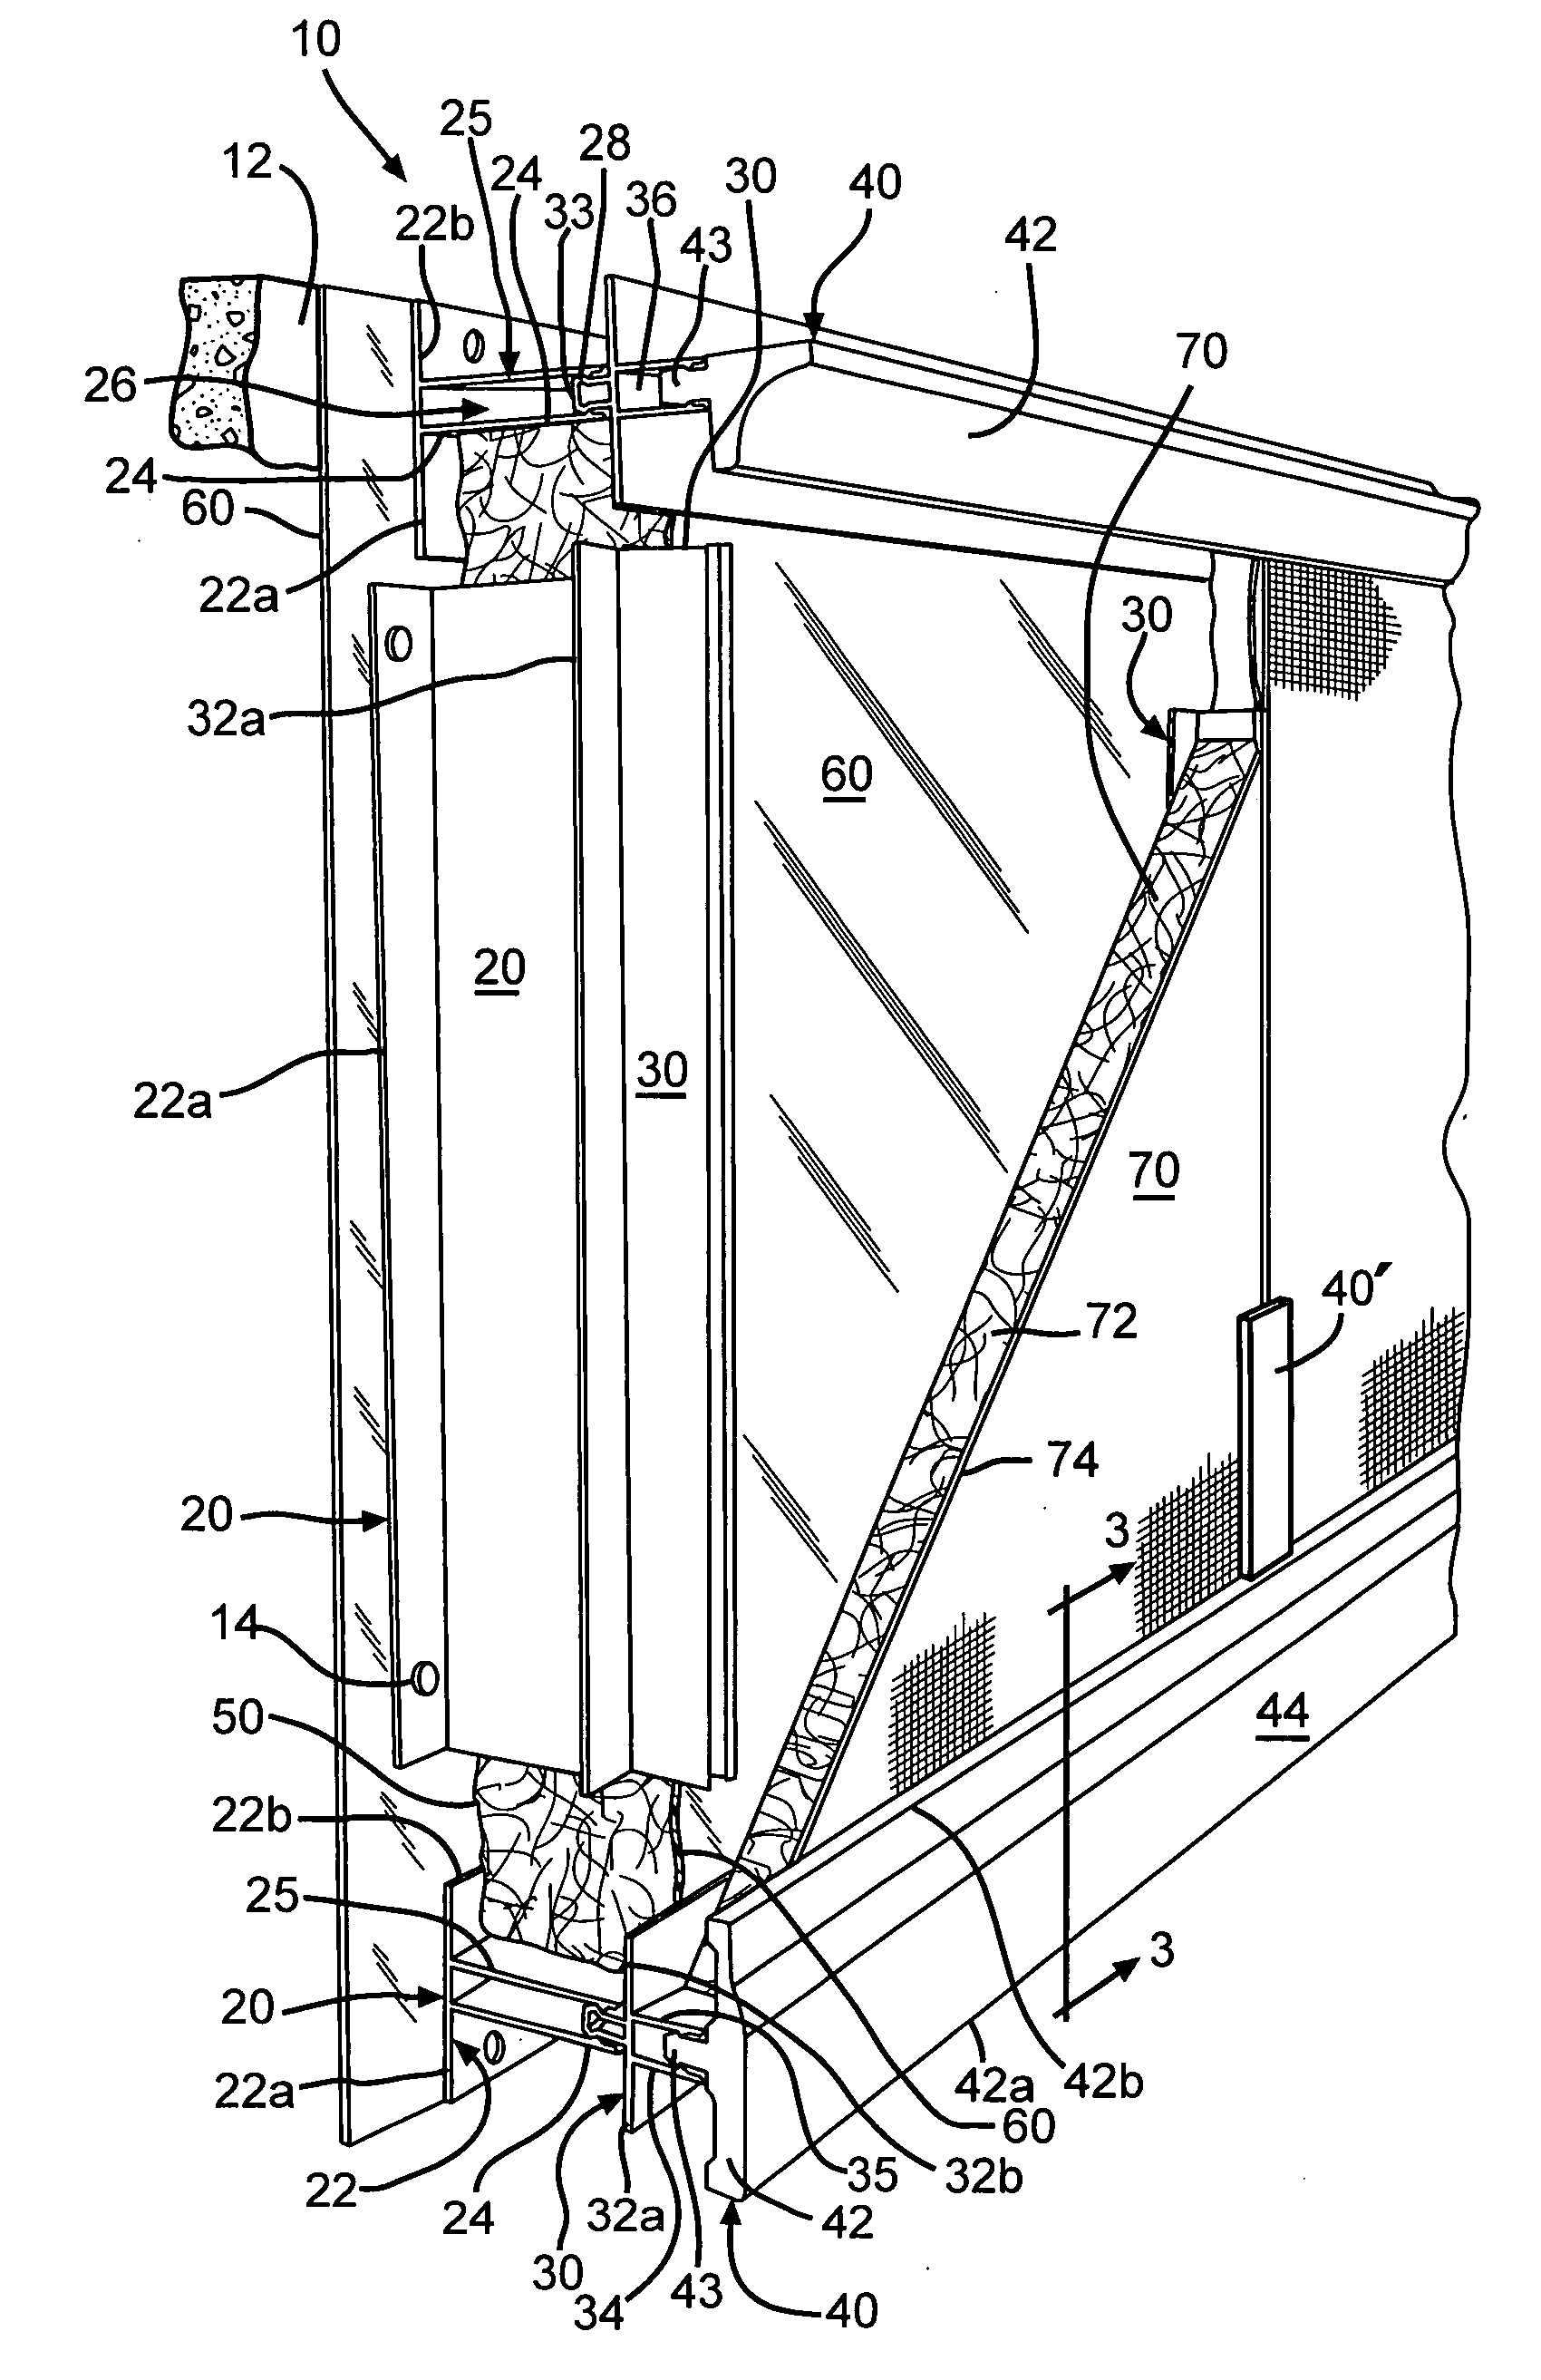 Insulation system for building structures